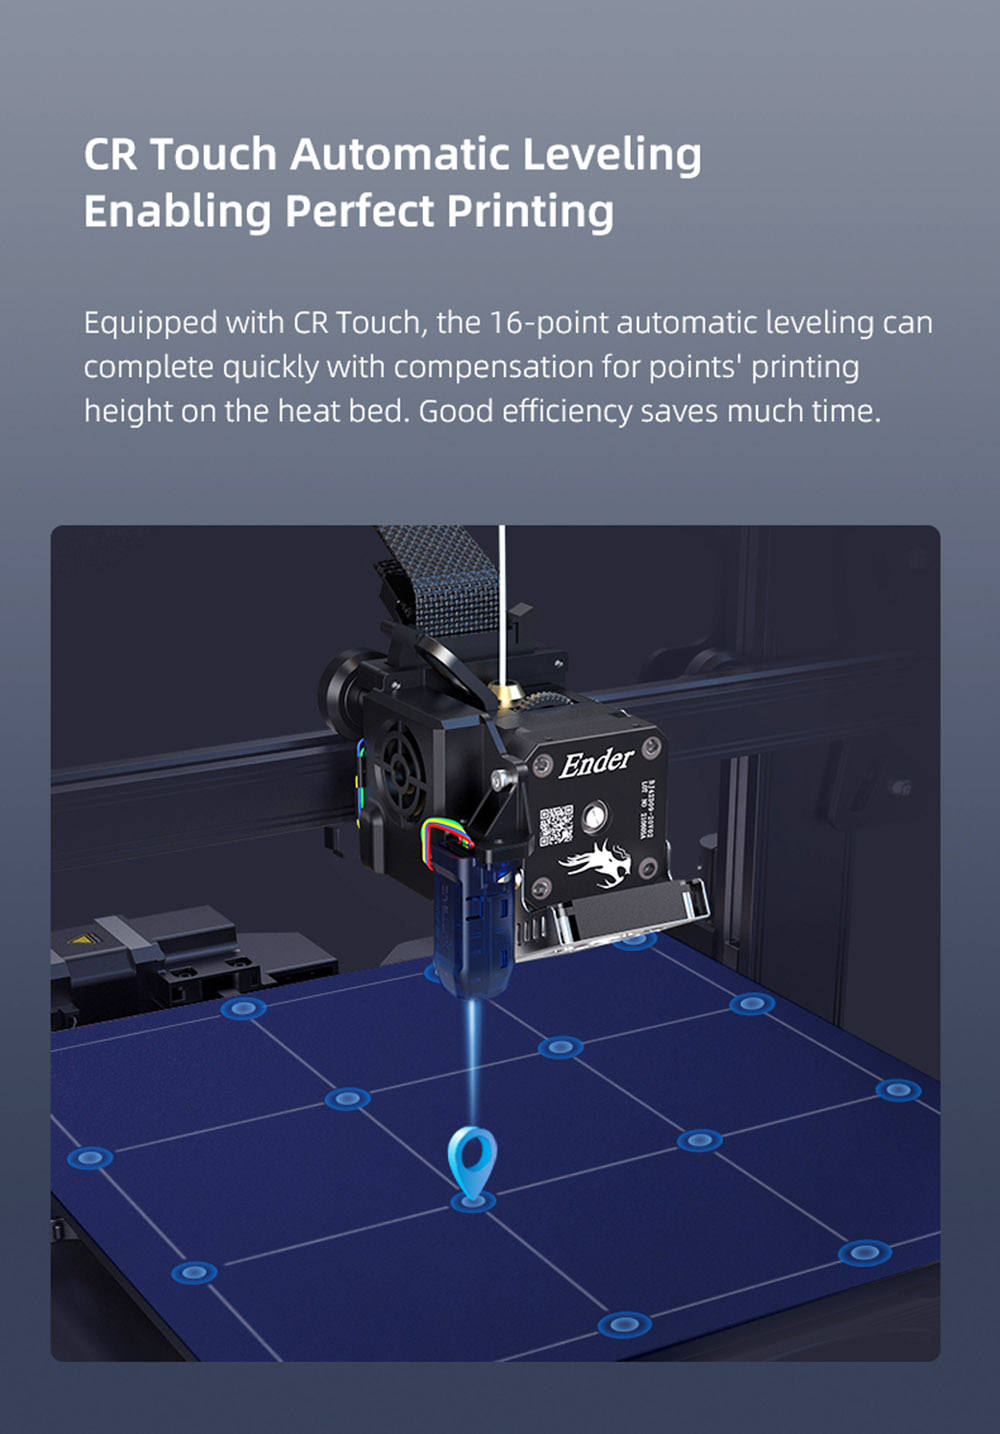 Creality Ender-3 S1 Pro 3D Printer, Sprite Dual-gear Direct Extruder, Dual Z-axis Sync, PLA/ABS/Wood/TPU/PETG/PA Printing, Bend Spring Sheet to Release Print, 220*220*270mm